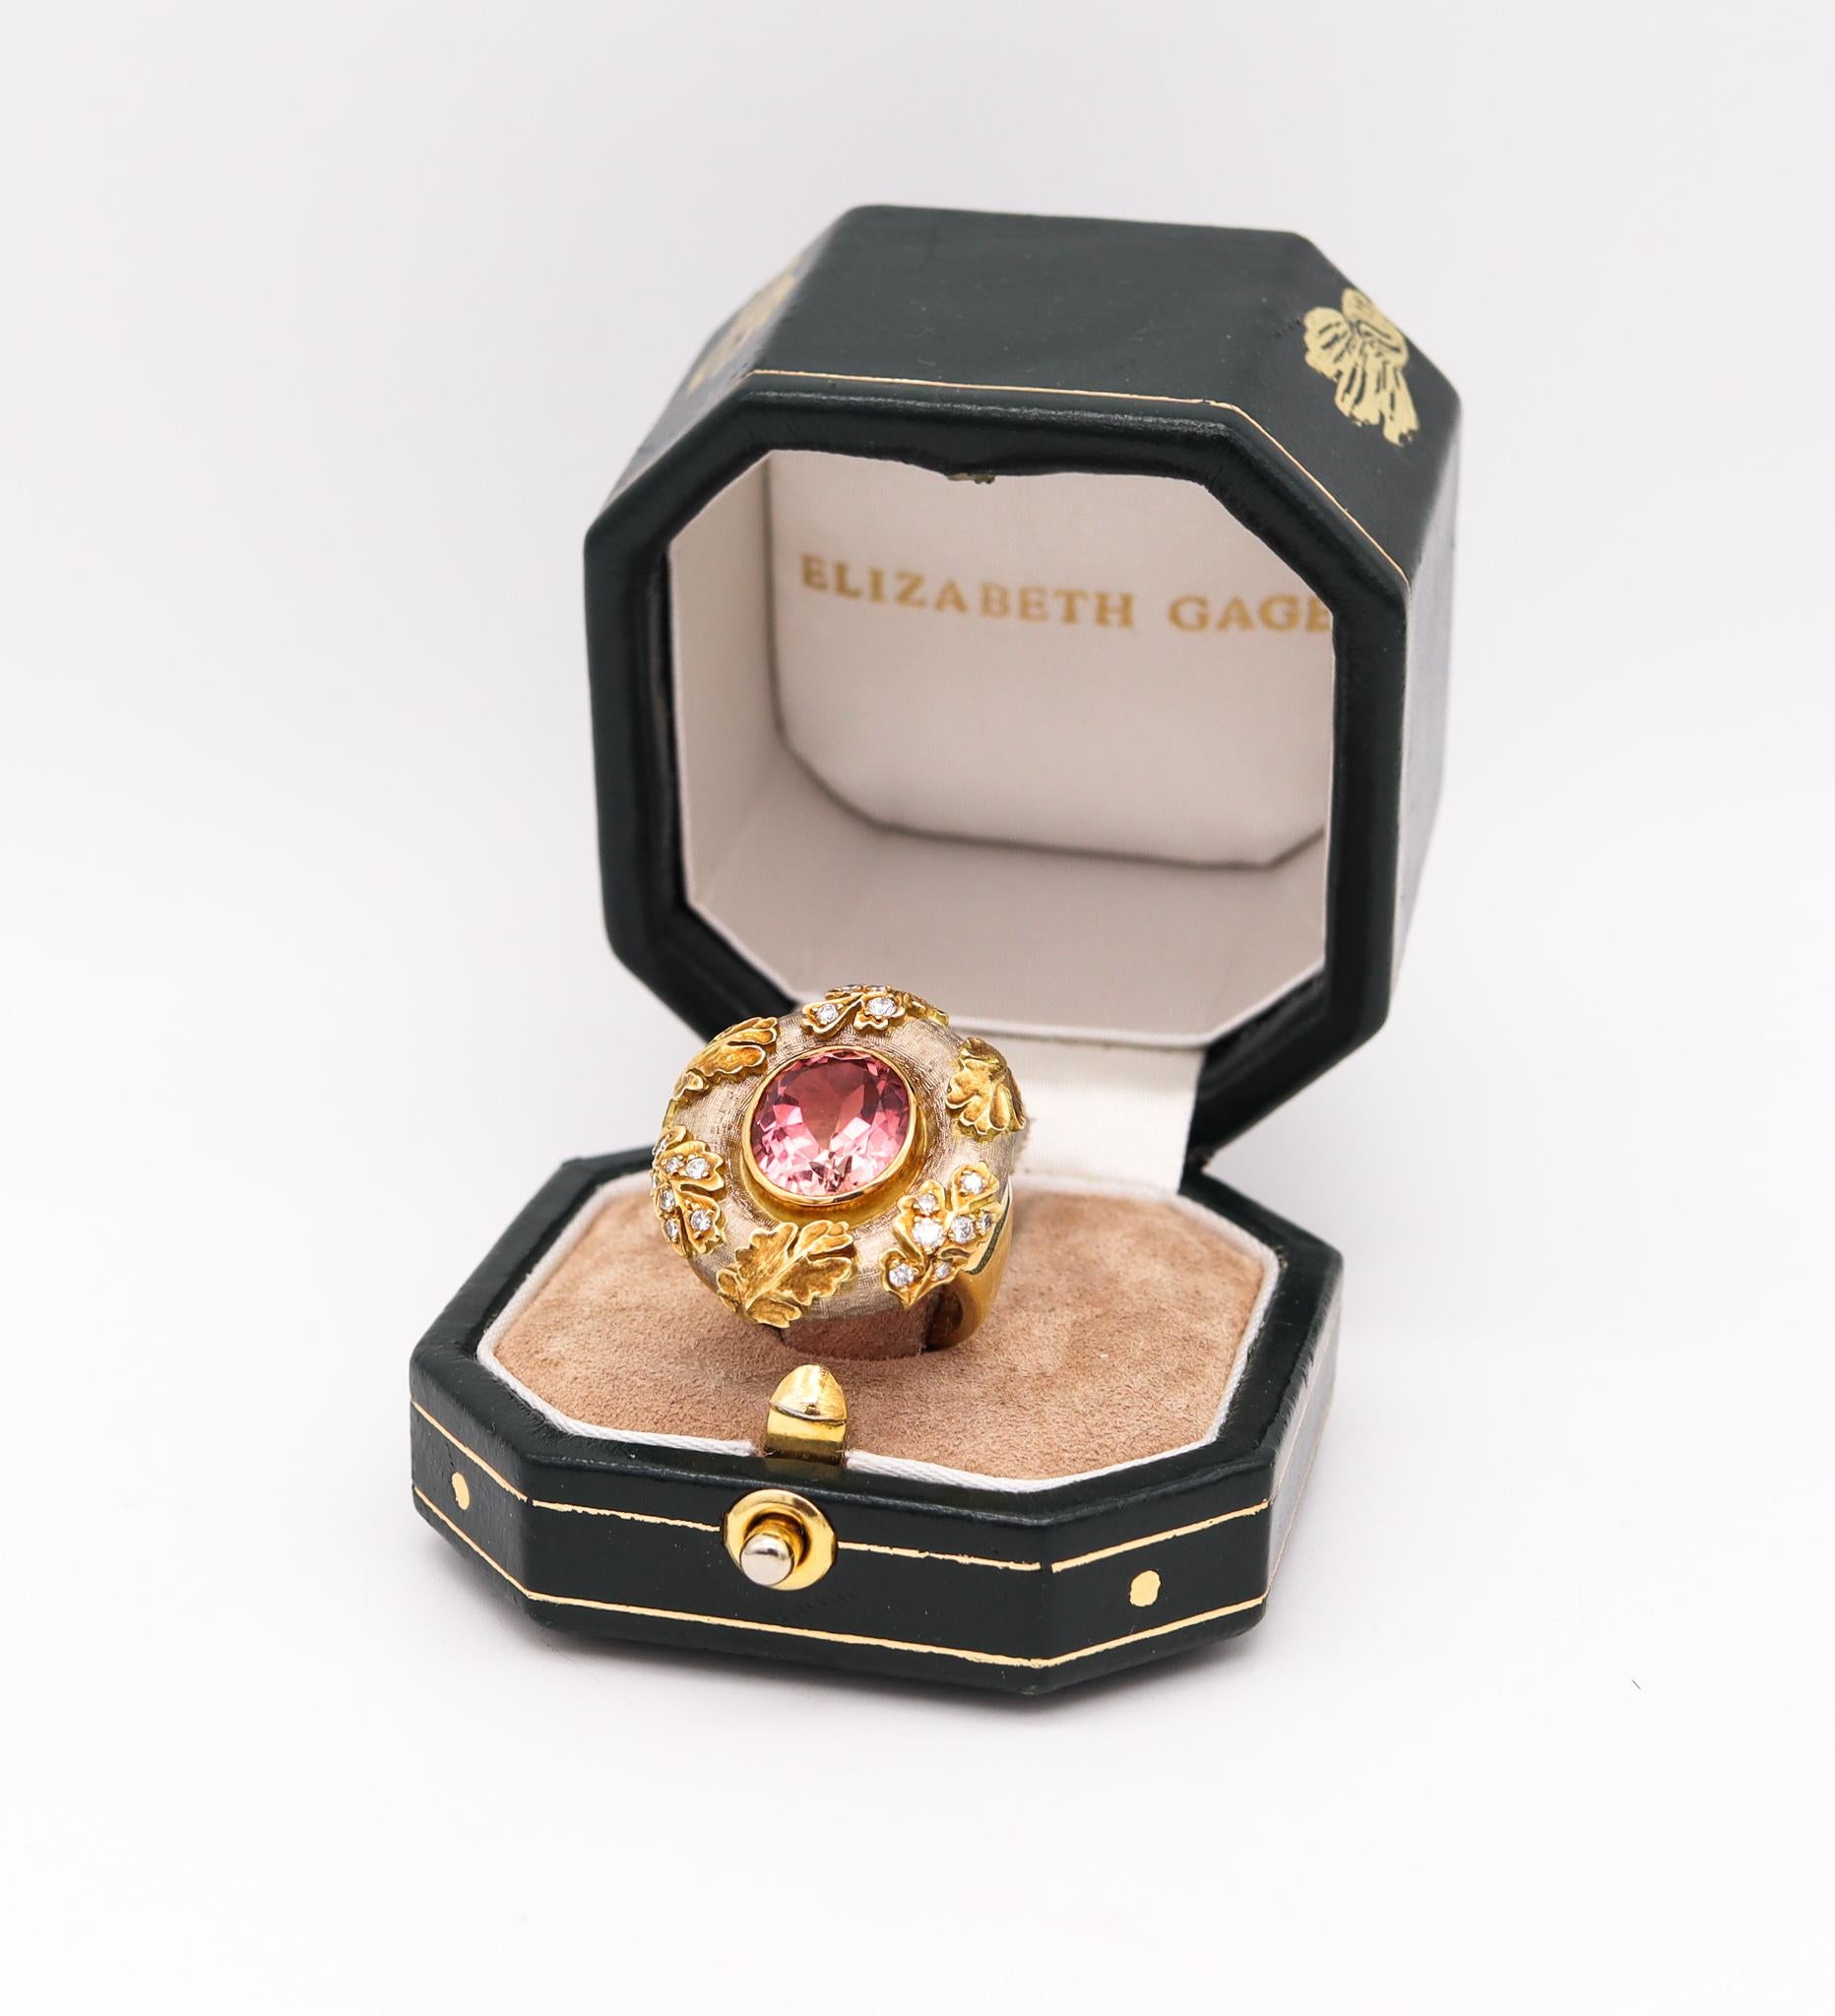 Oval Cut Elizabeth Gage London Cocktail Ring in 18Kt Gold 6.95 Cts Diamonds & Rose Topaz